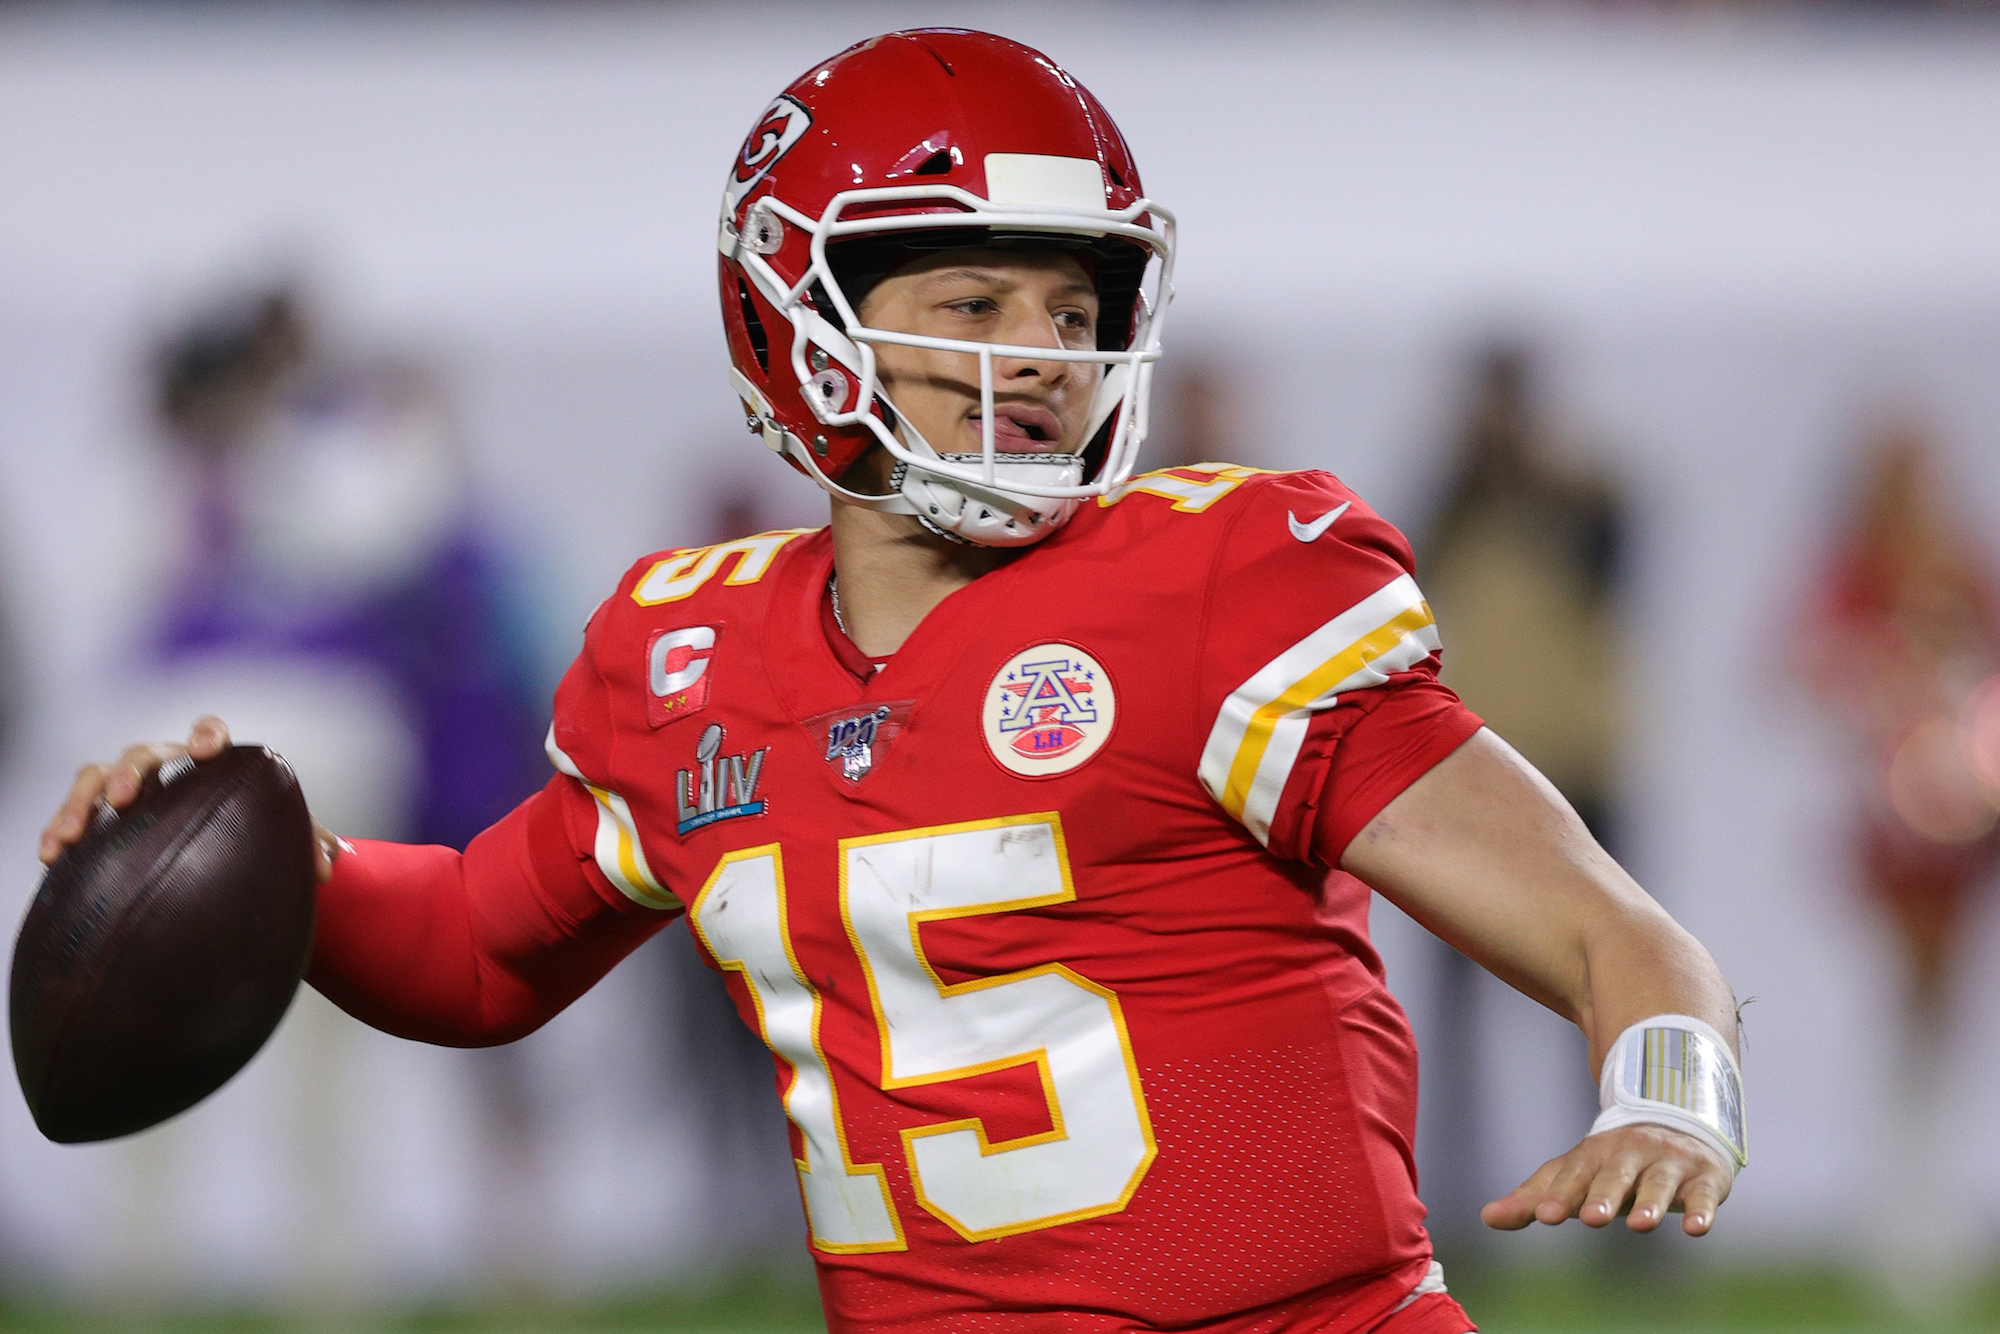 Patrick Mahomes might have a 99 overall rating in Madden 21, but he's not happy about one aspect of his stats.